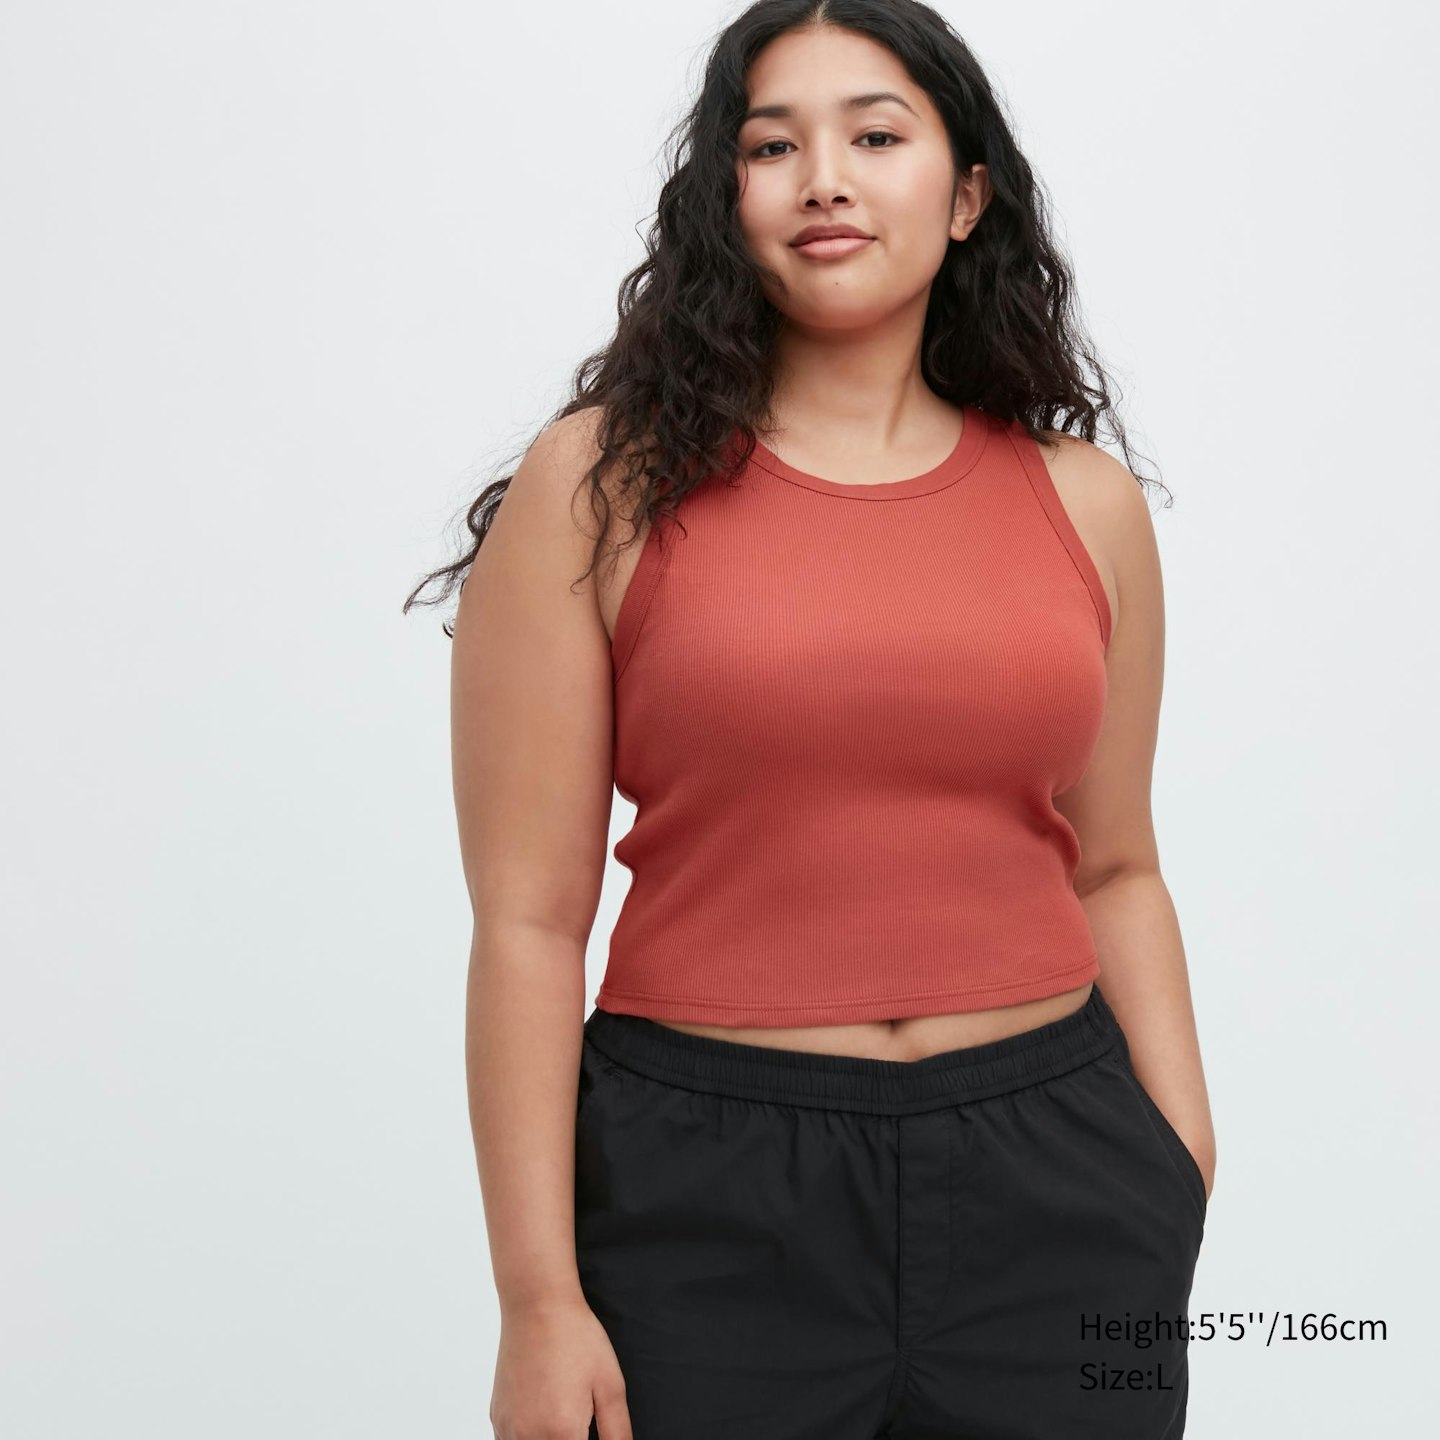 Uniqlo's Viral Tank Top Is £19.90